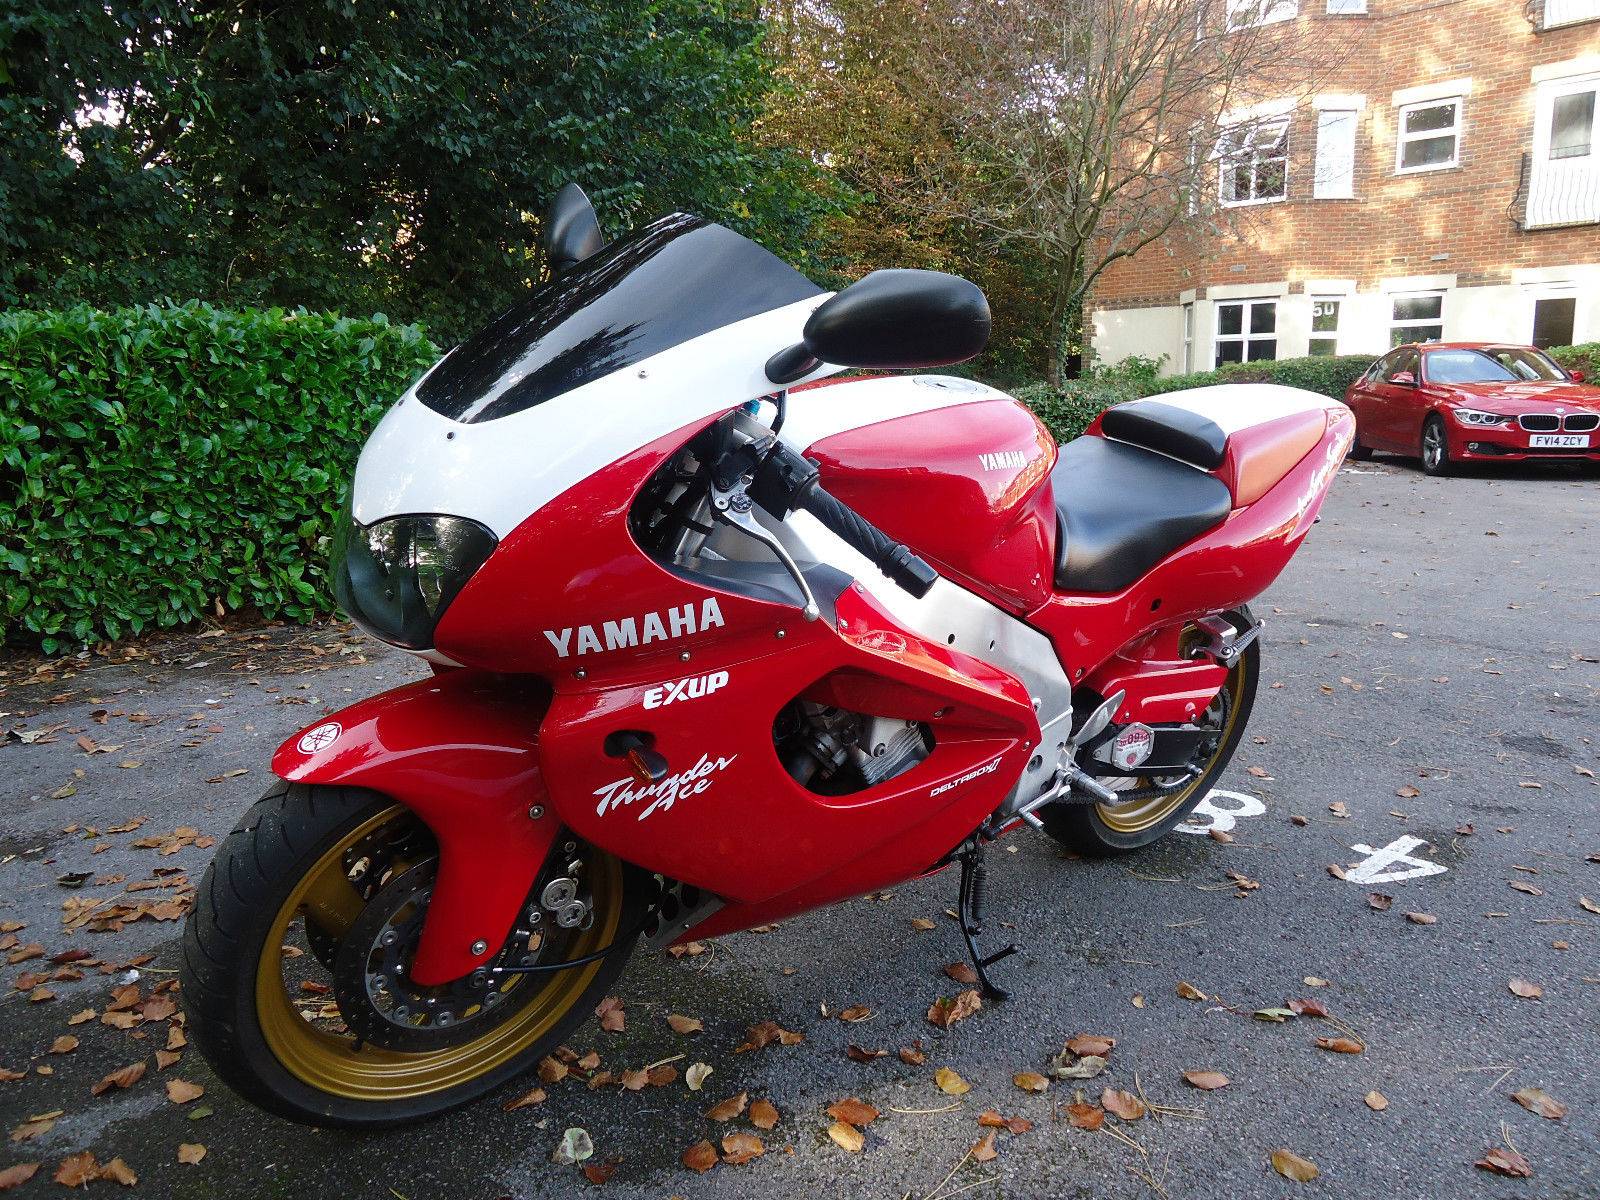 Yamaha yzf1000r thunderace - yamaha yzf1000r thunderace - abcdef.wiki